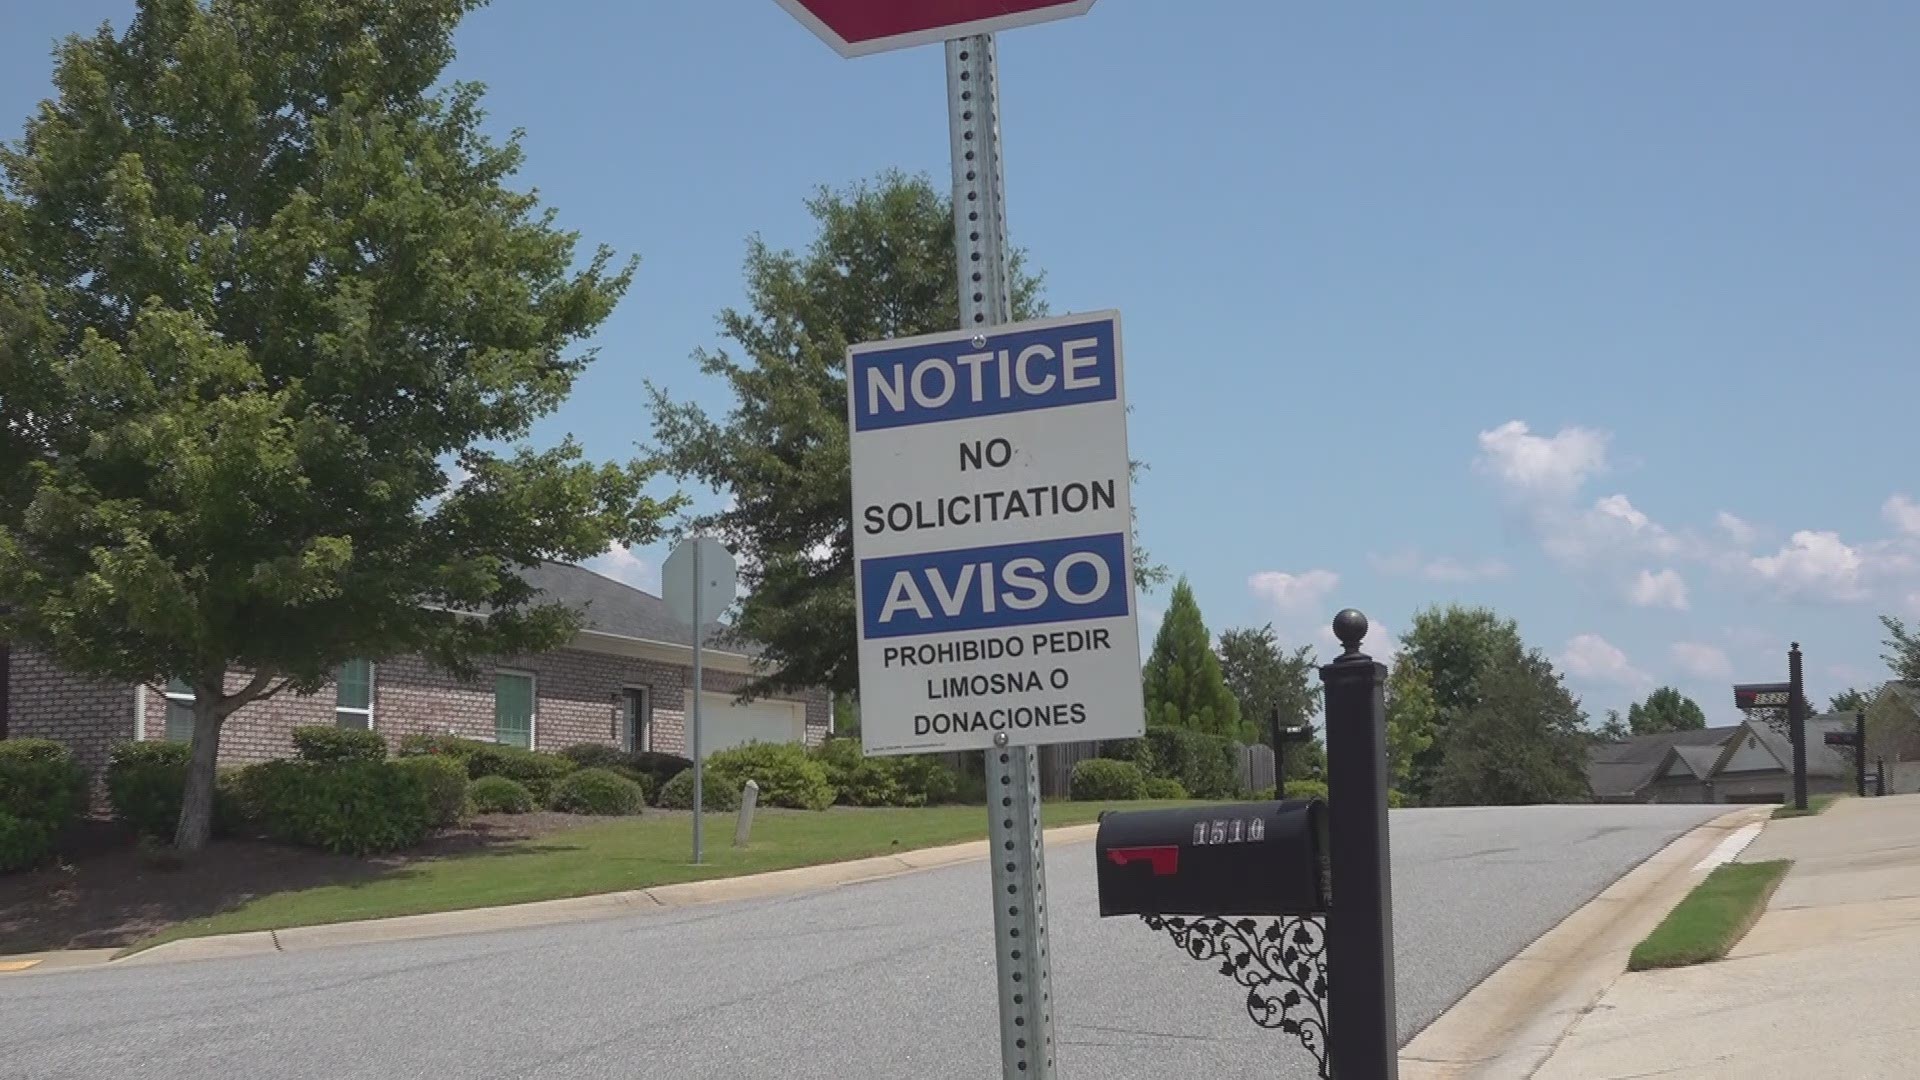 A social media post by the Forsyth County Sheriff’s Office is causing confusion, regarding the county’s solicitation ordinance.